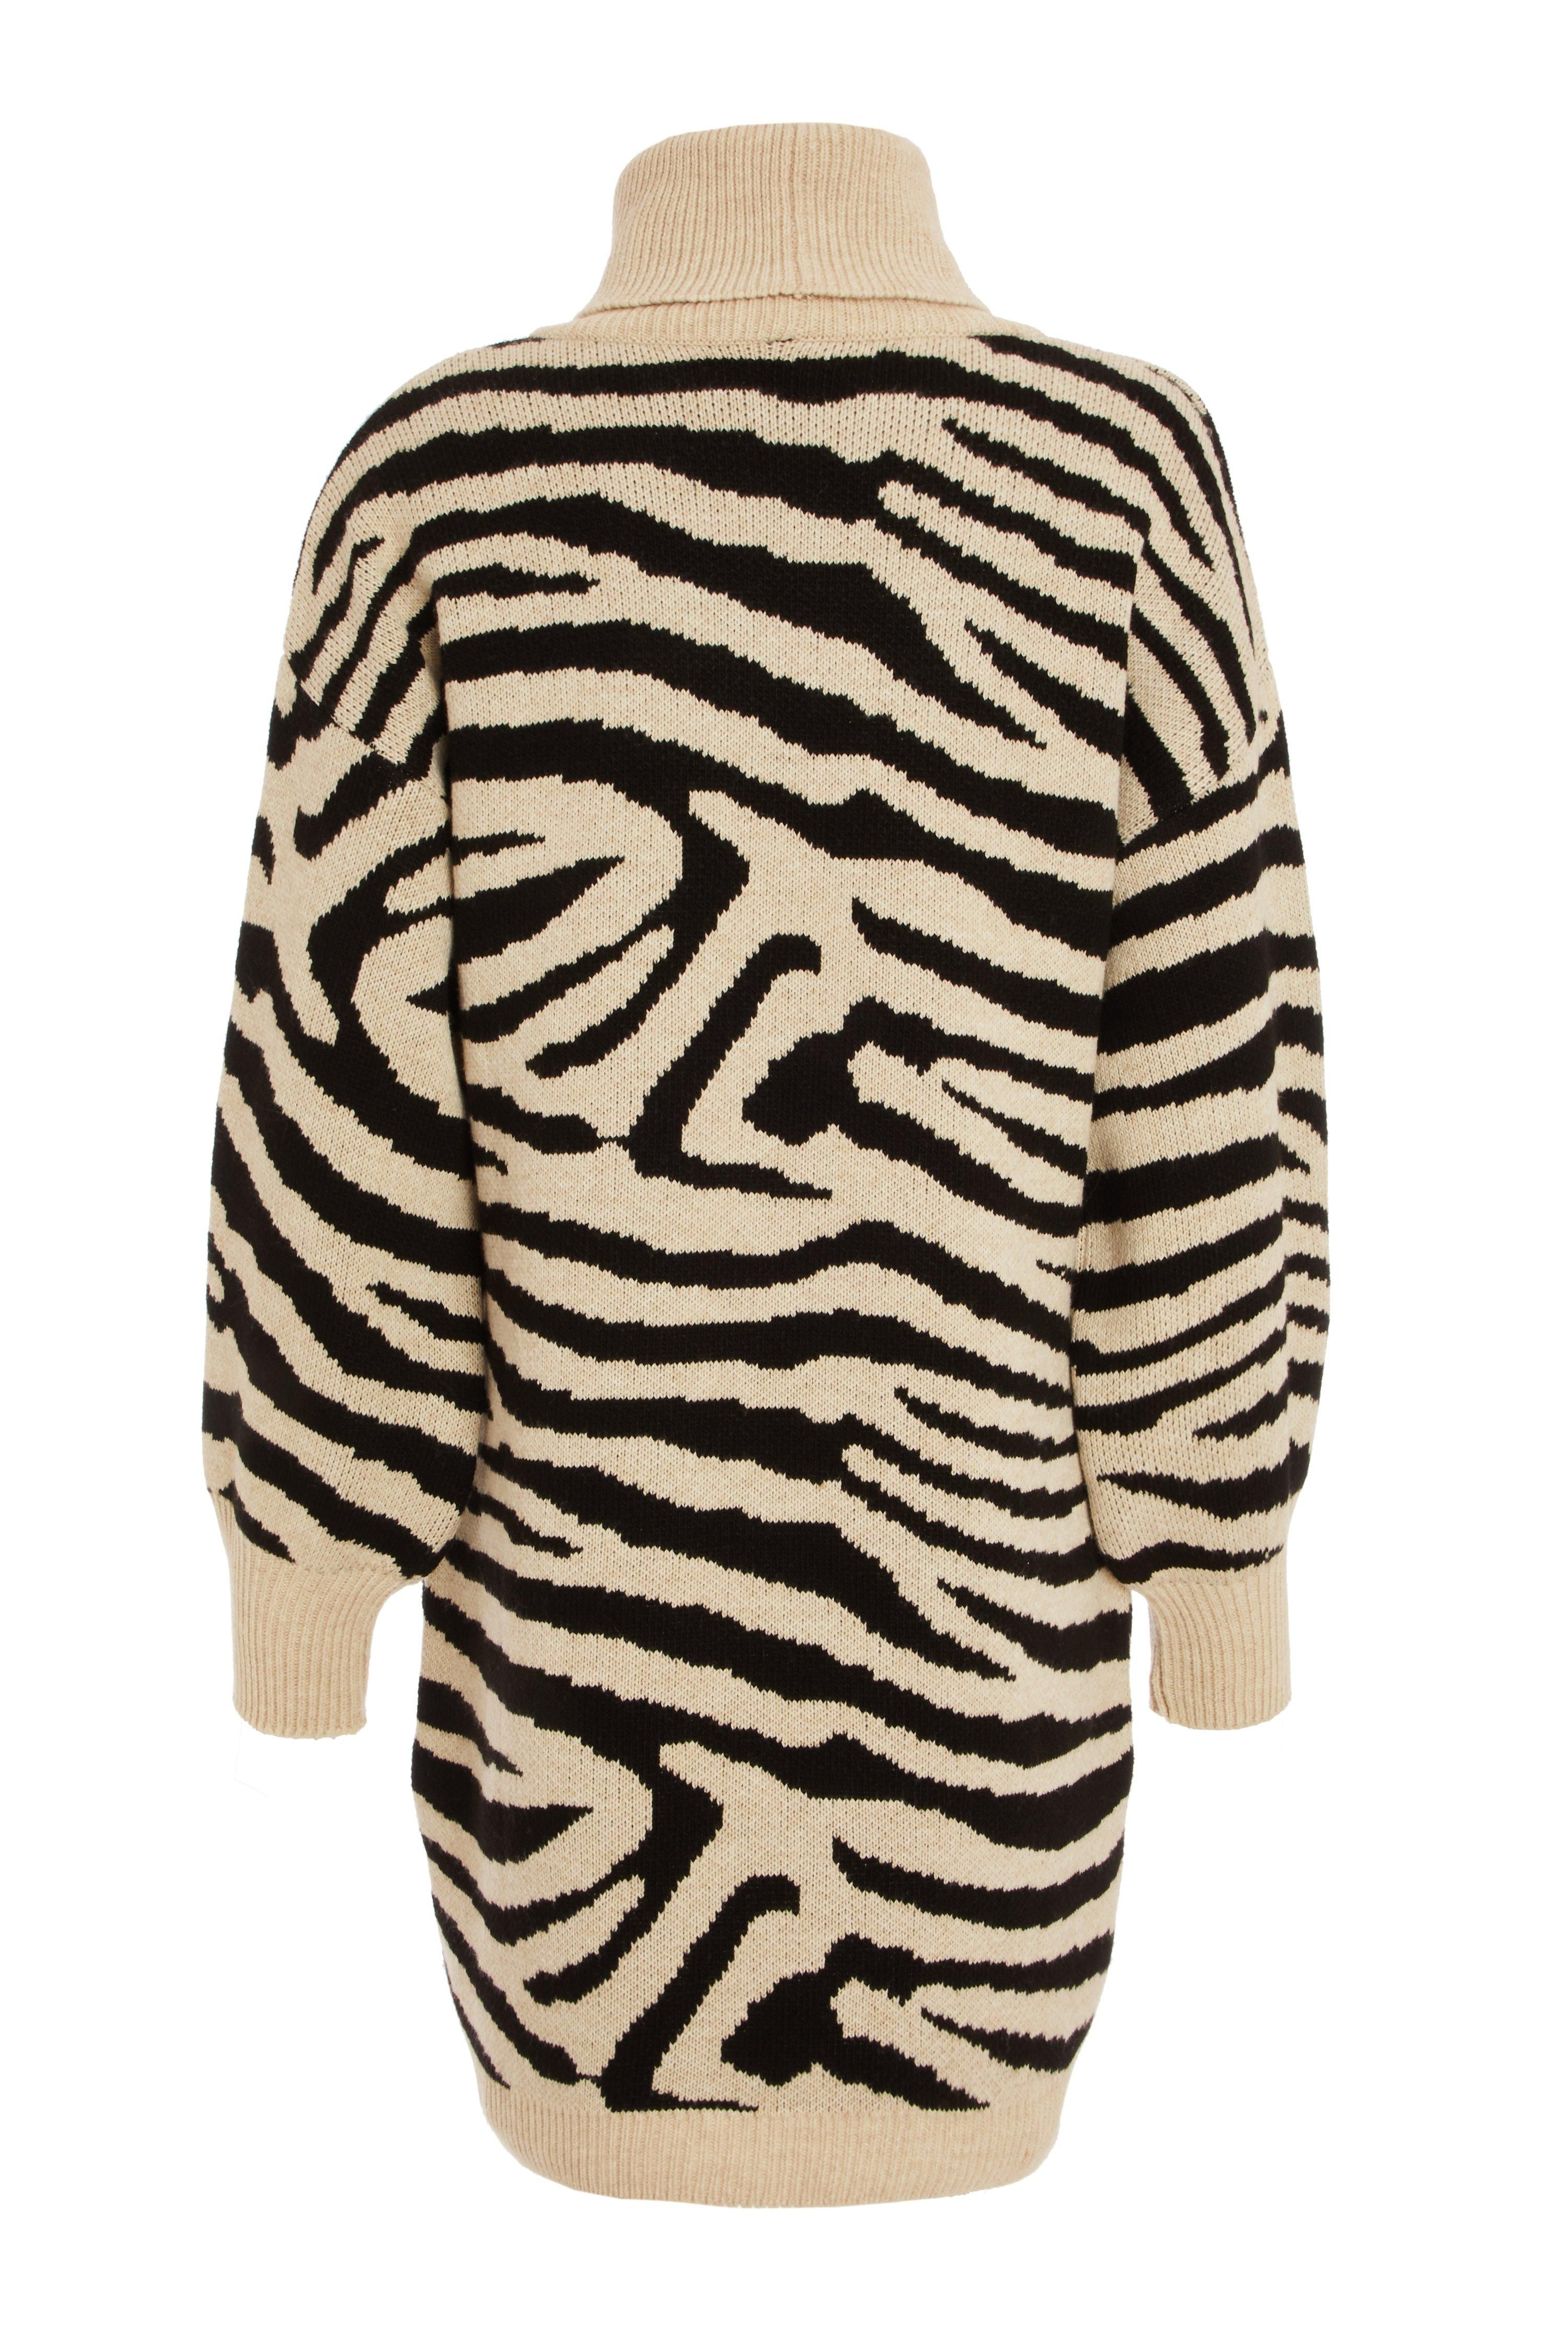 - Knitted dress  - Animal print   - Turtle neck  - Long sleeve  - Jumper dress  - Length: 90cm approx  - Model height: 5' 9